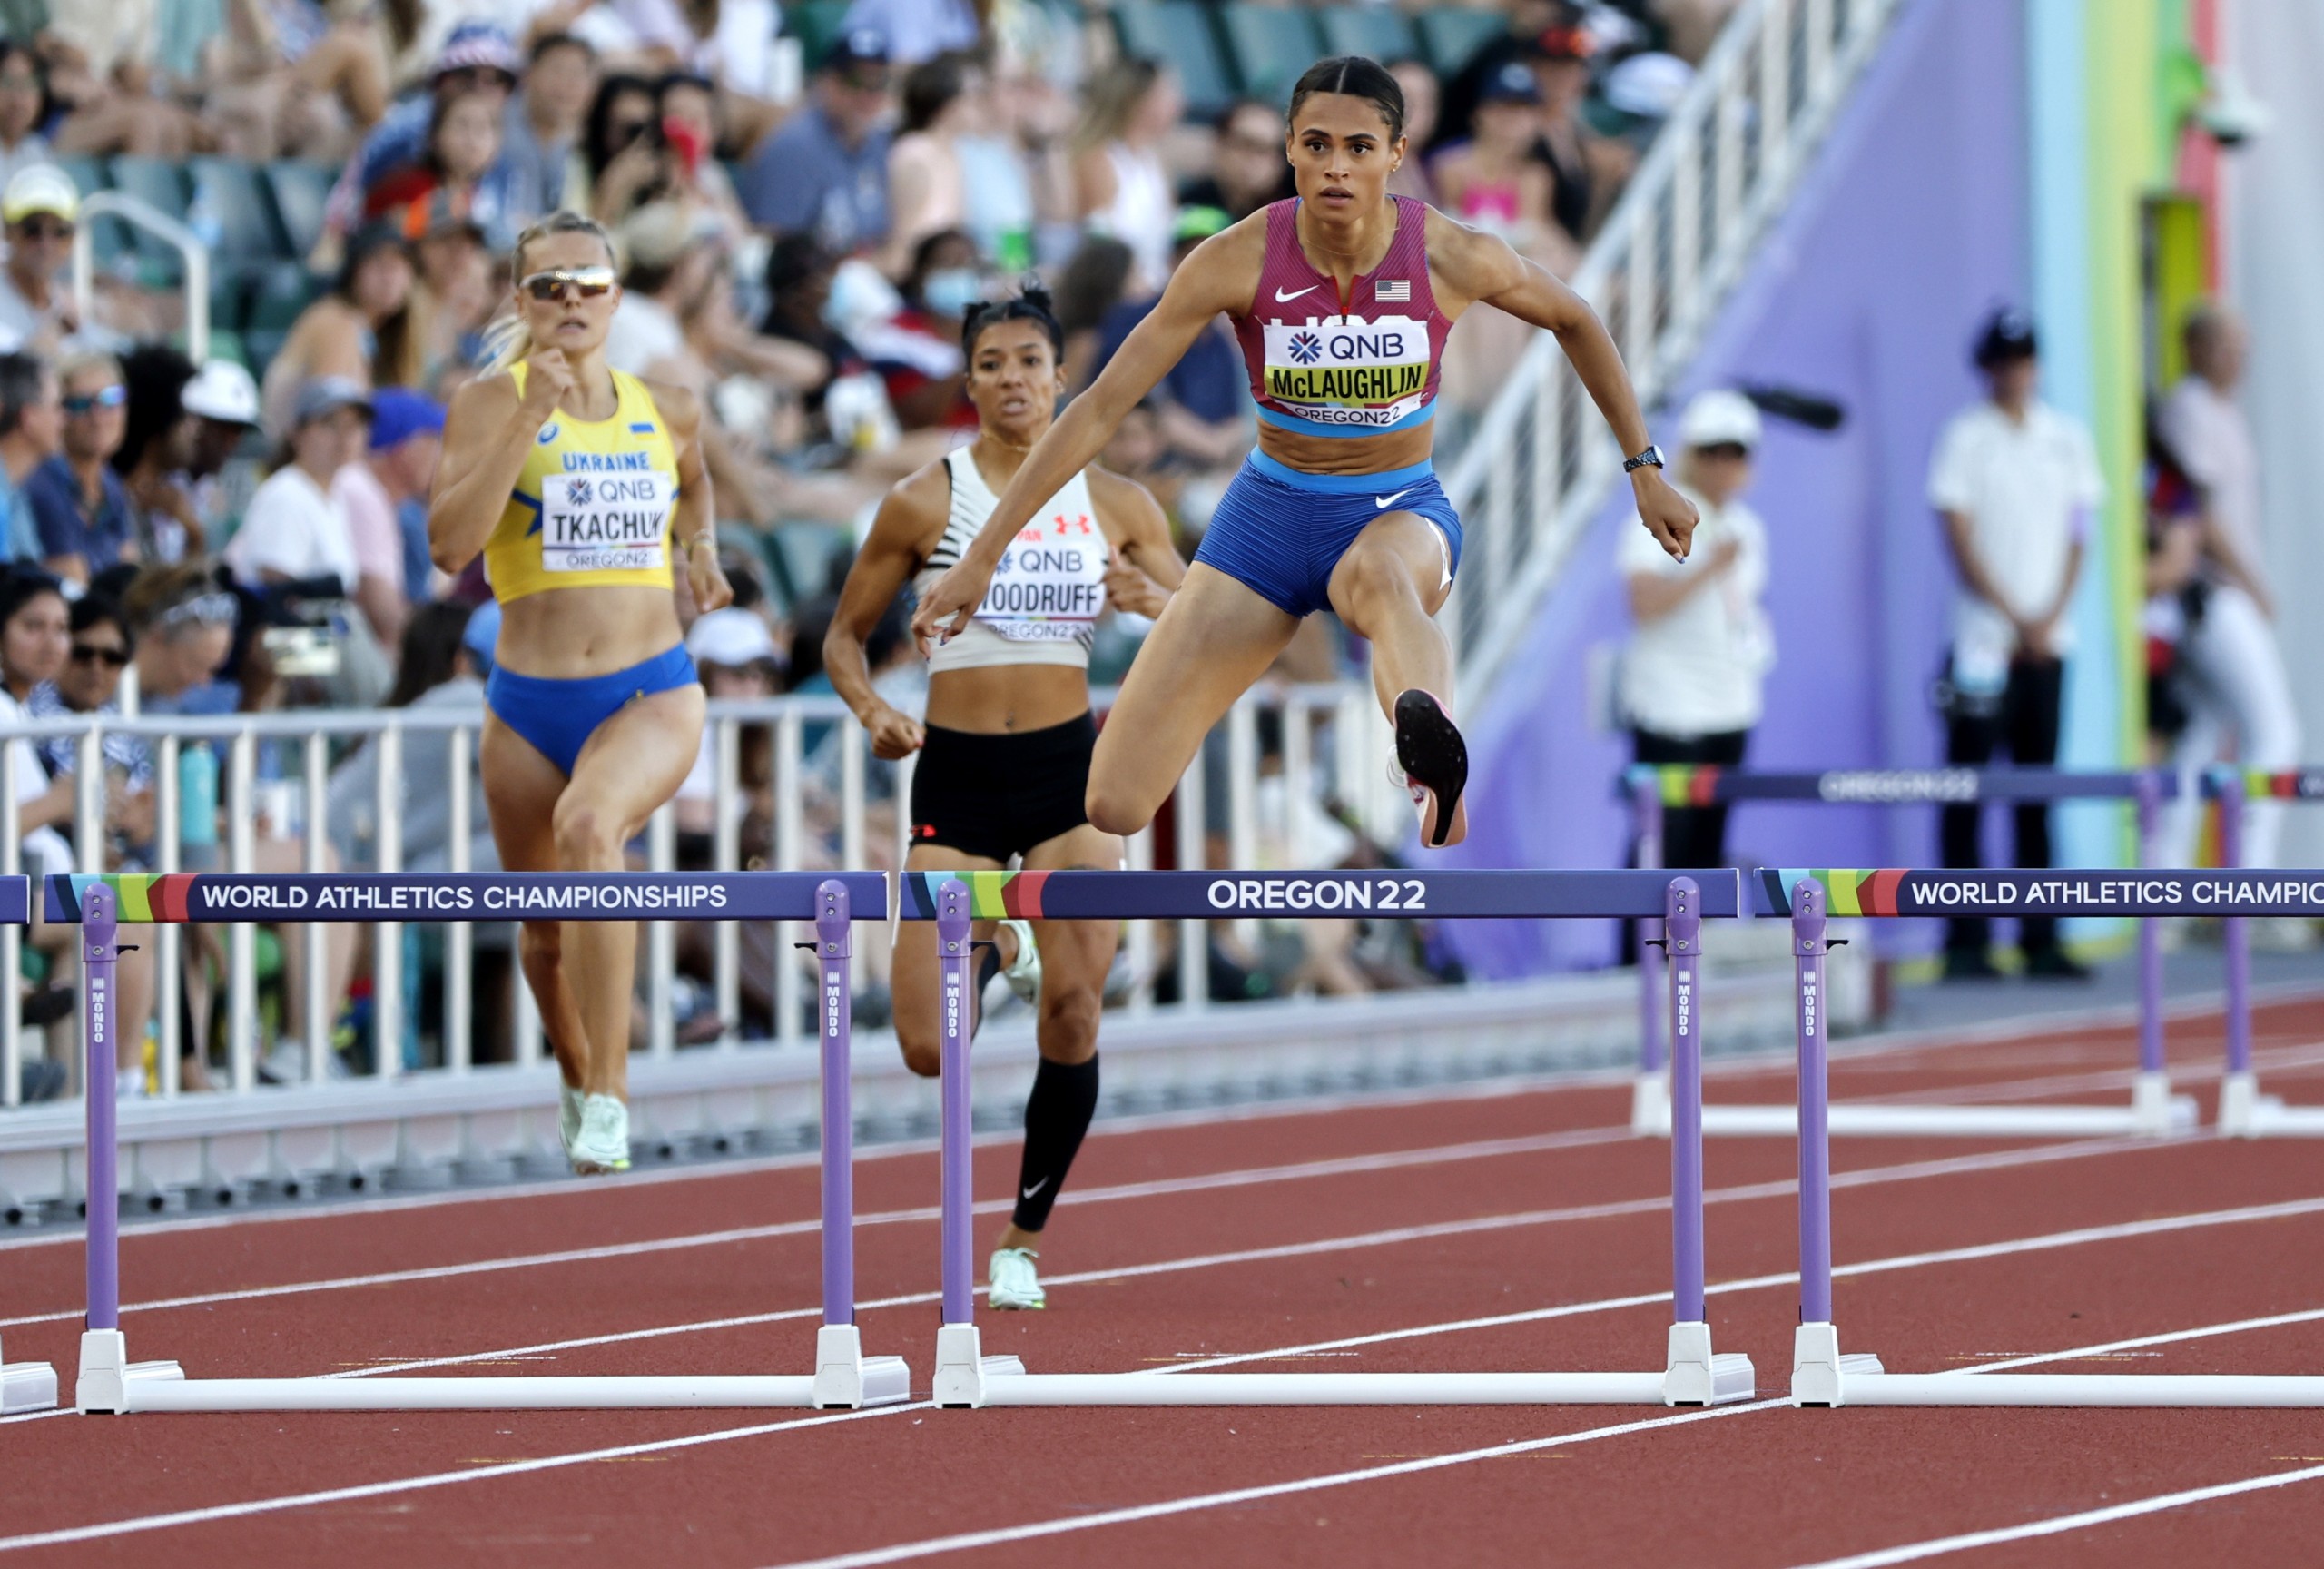 epa10083261 Sydney McLaughlin of the US clears a hurdle in the women's 4000m Hurdles at the World Athletics Championships Oregon22 at Hayward Field in Eugene, Oregon, USA, 20 July 2022.  EPA/John G. Mabanglo